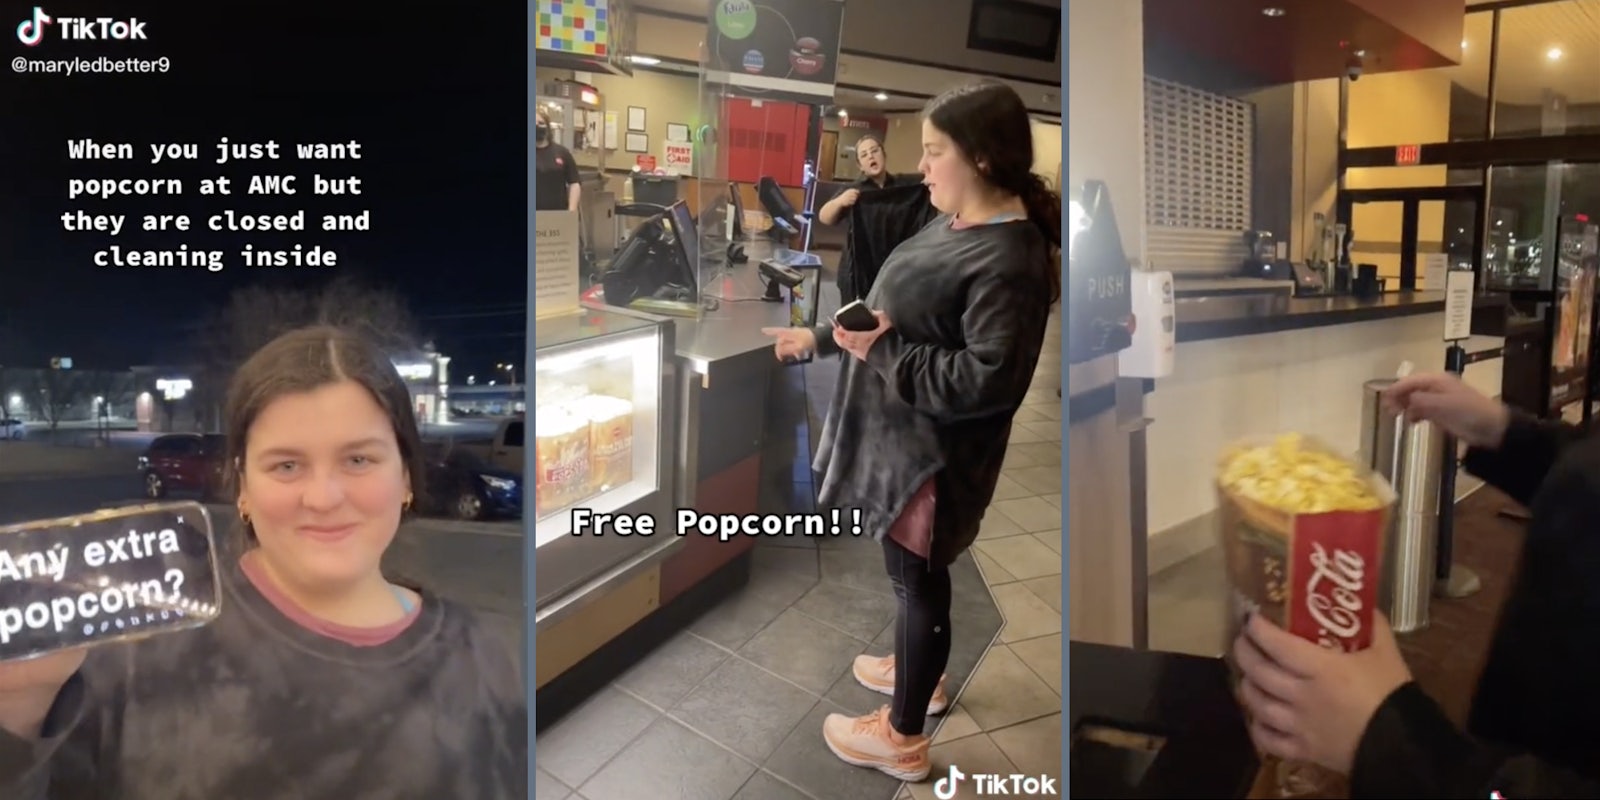 'Any free popcorn?' (L), Woman at a concession stand (M), bag of popcorn (R)